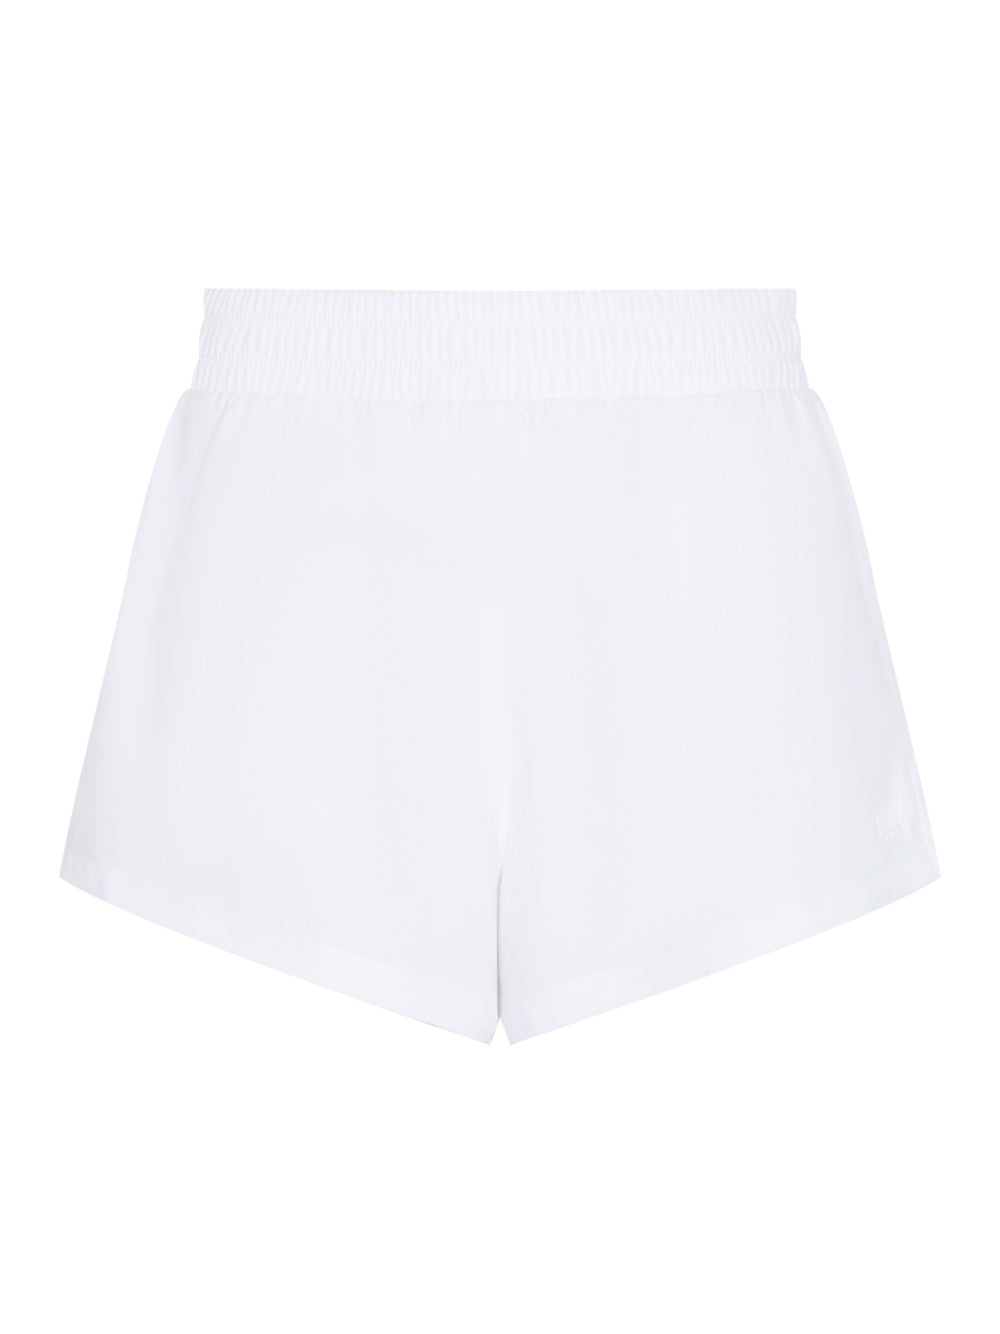 Double Layer Training Short With Runners Pocket And Logo (White)